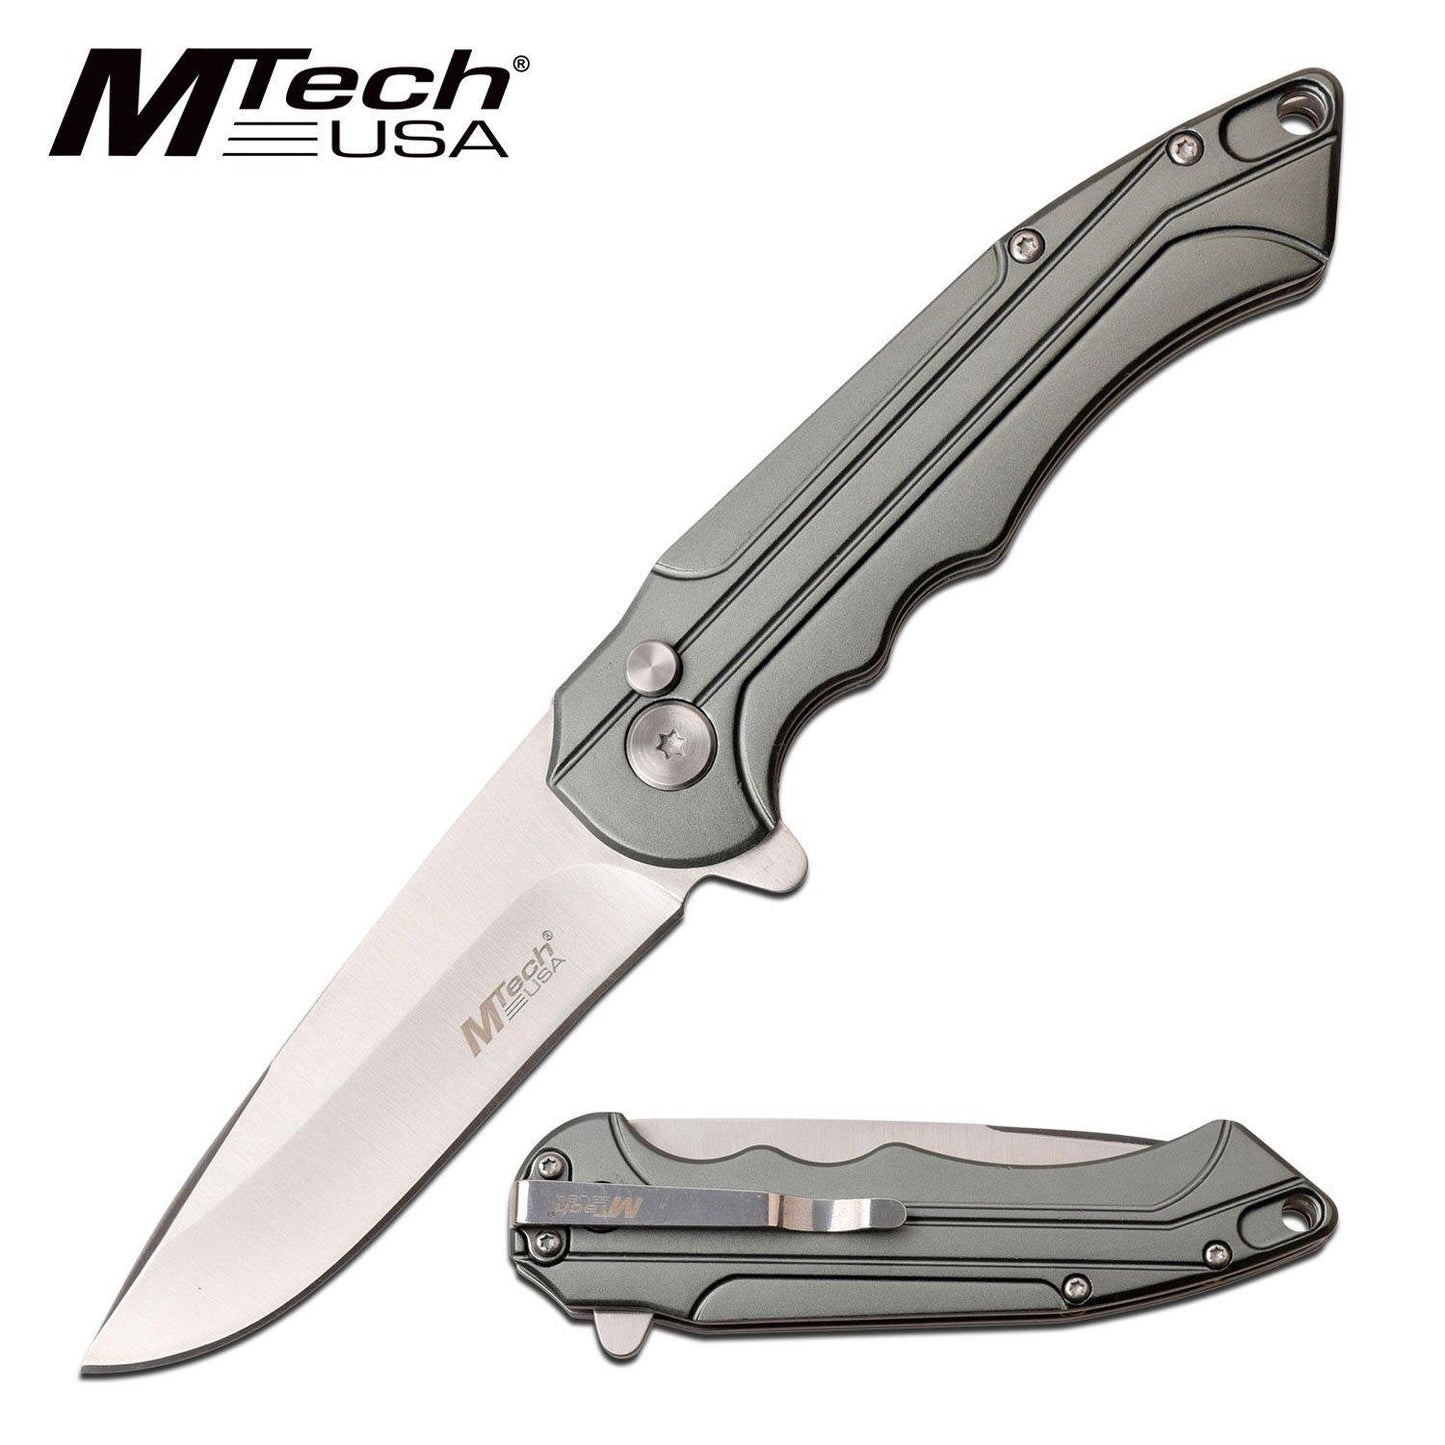 Mtech Drop Point Fine Edge Blade Folding Knife - 7.6 Inches Overall #mt-1022Gy - Xhunter New Zealand